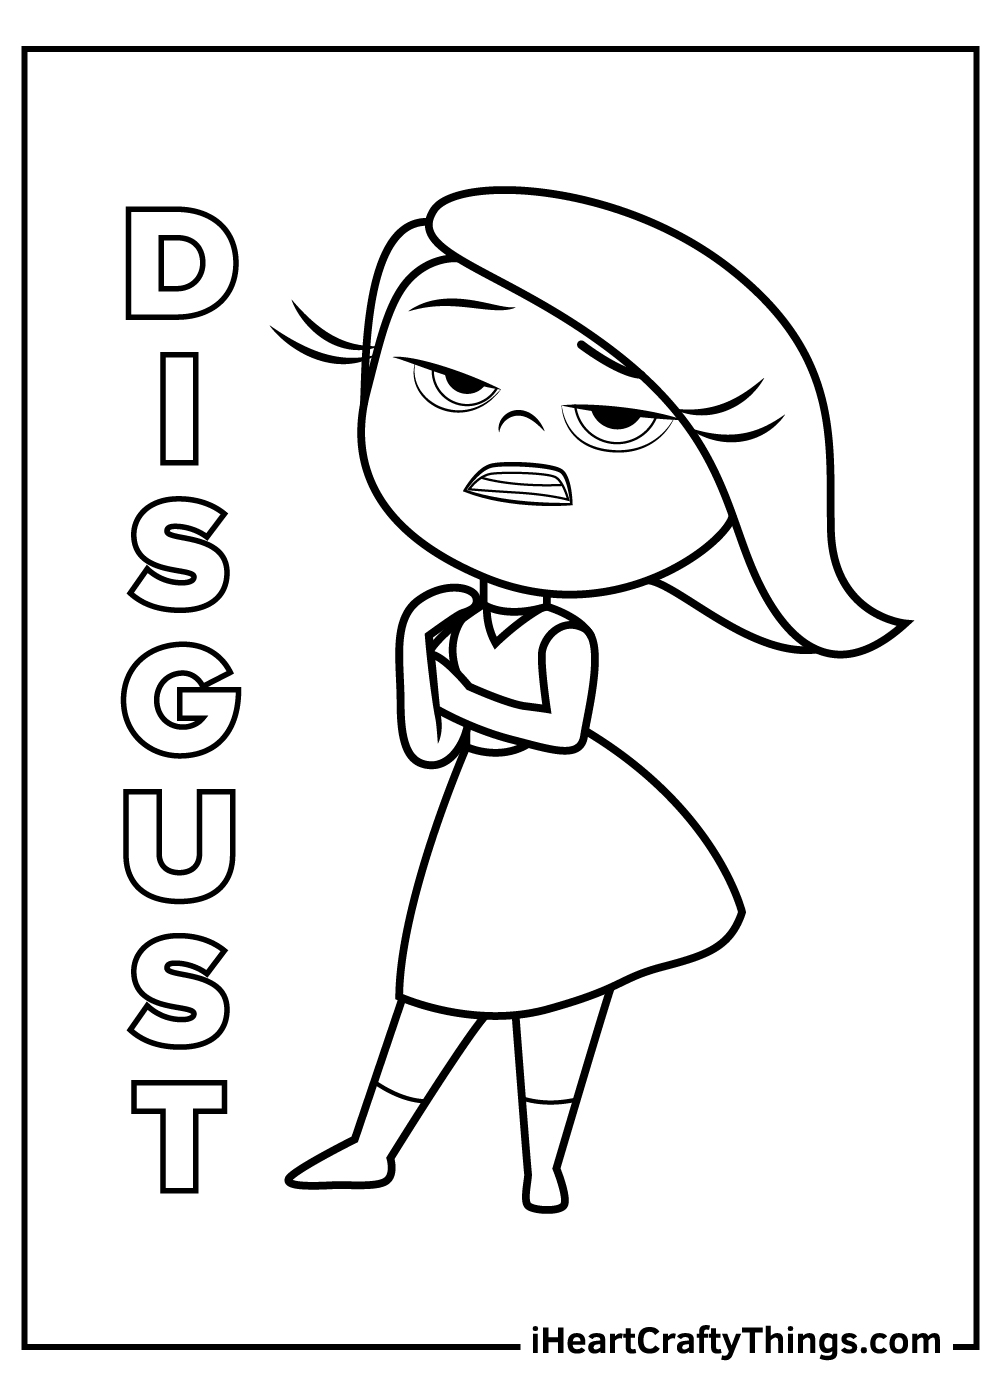 Inside Out Coloring Pages Updated 20